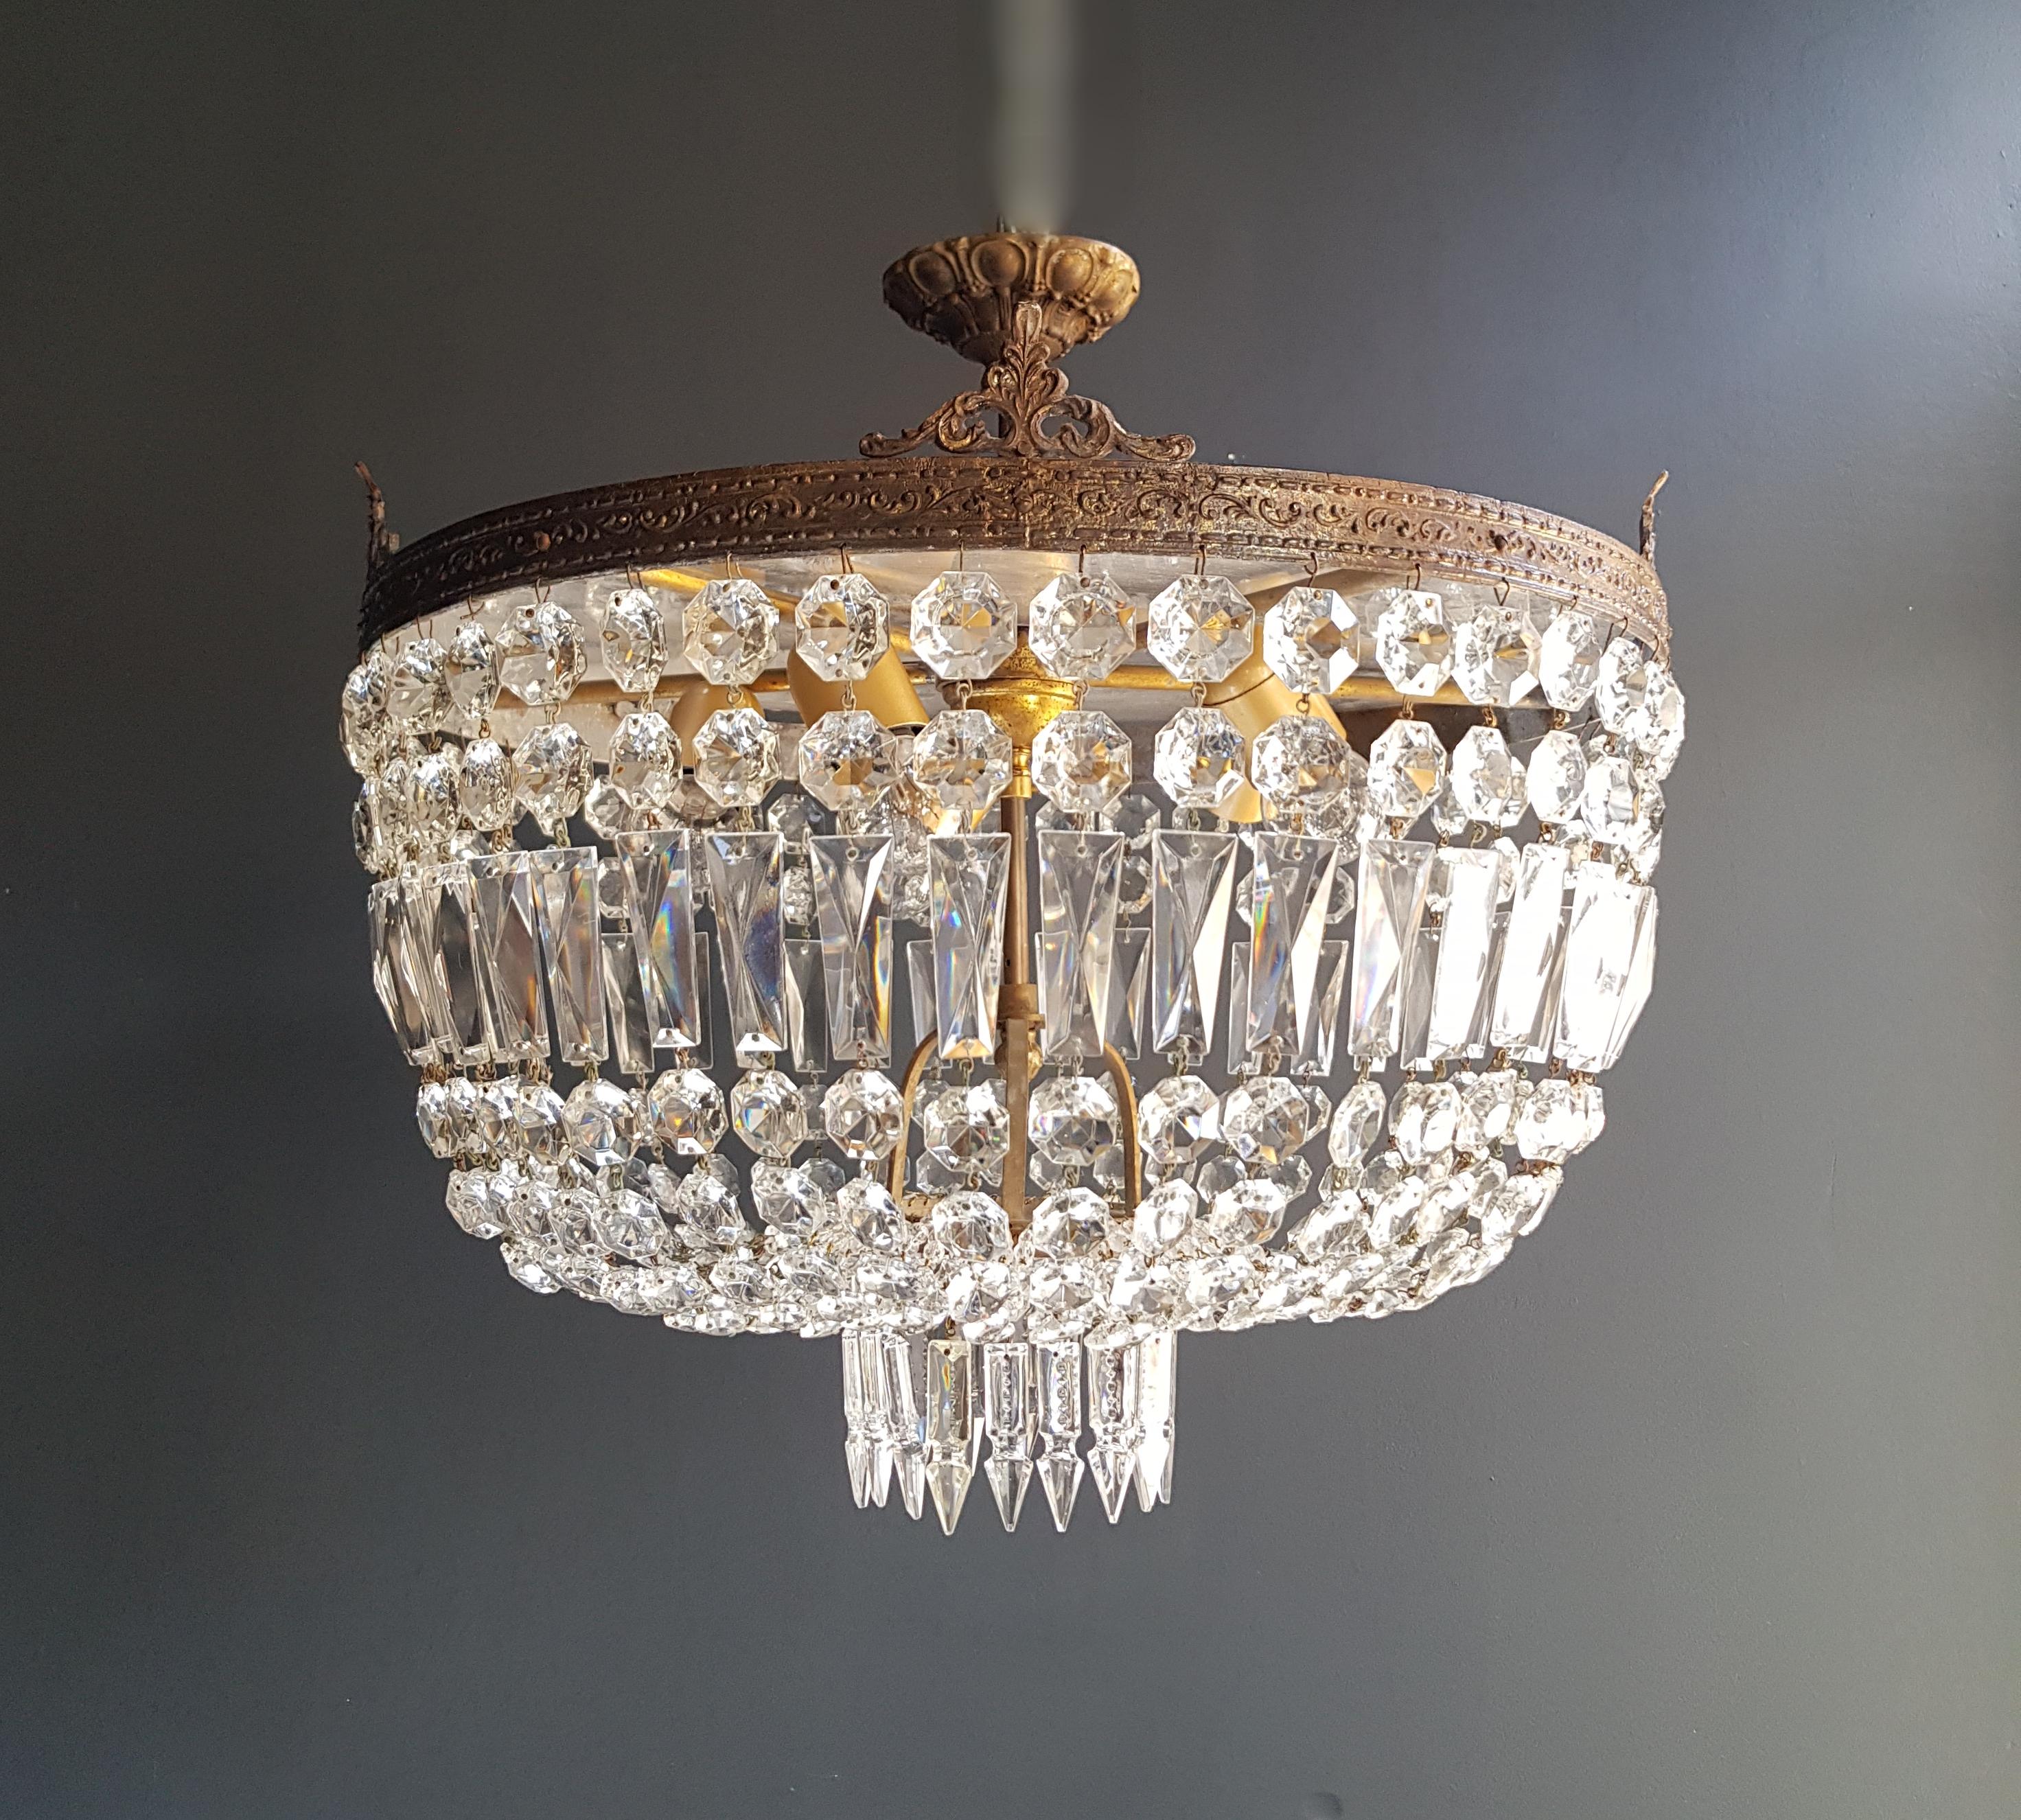 Low oval ceiling crystal chandelier brass.
Cabling completely renewed. Crystal hand knotted.
Measures: Total height 45 cm, height without chain 45 cm, diameter 50 cm. weight (approximately) 4kg.

Number of lights: 5-light bulb sockets: